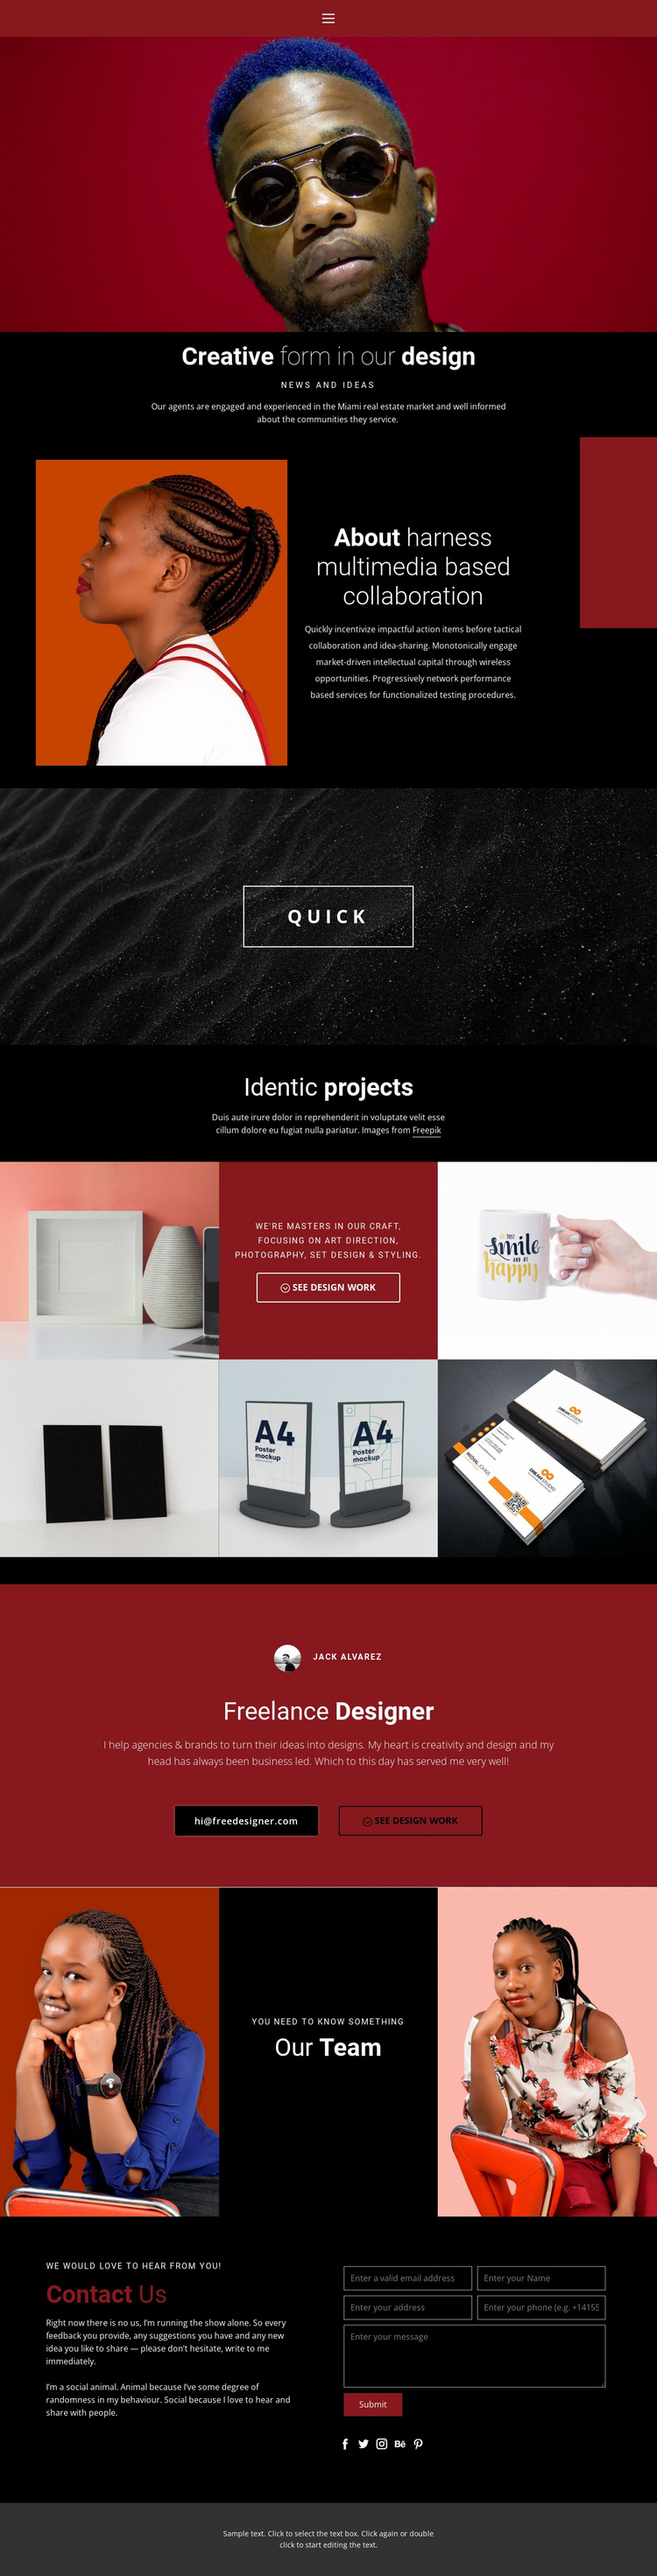 Creative form in design HTML5 Template